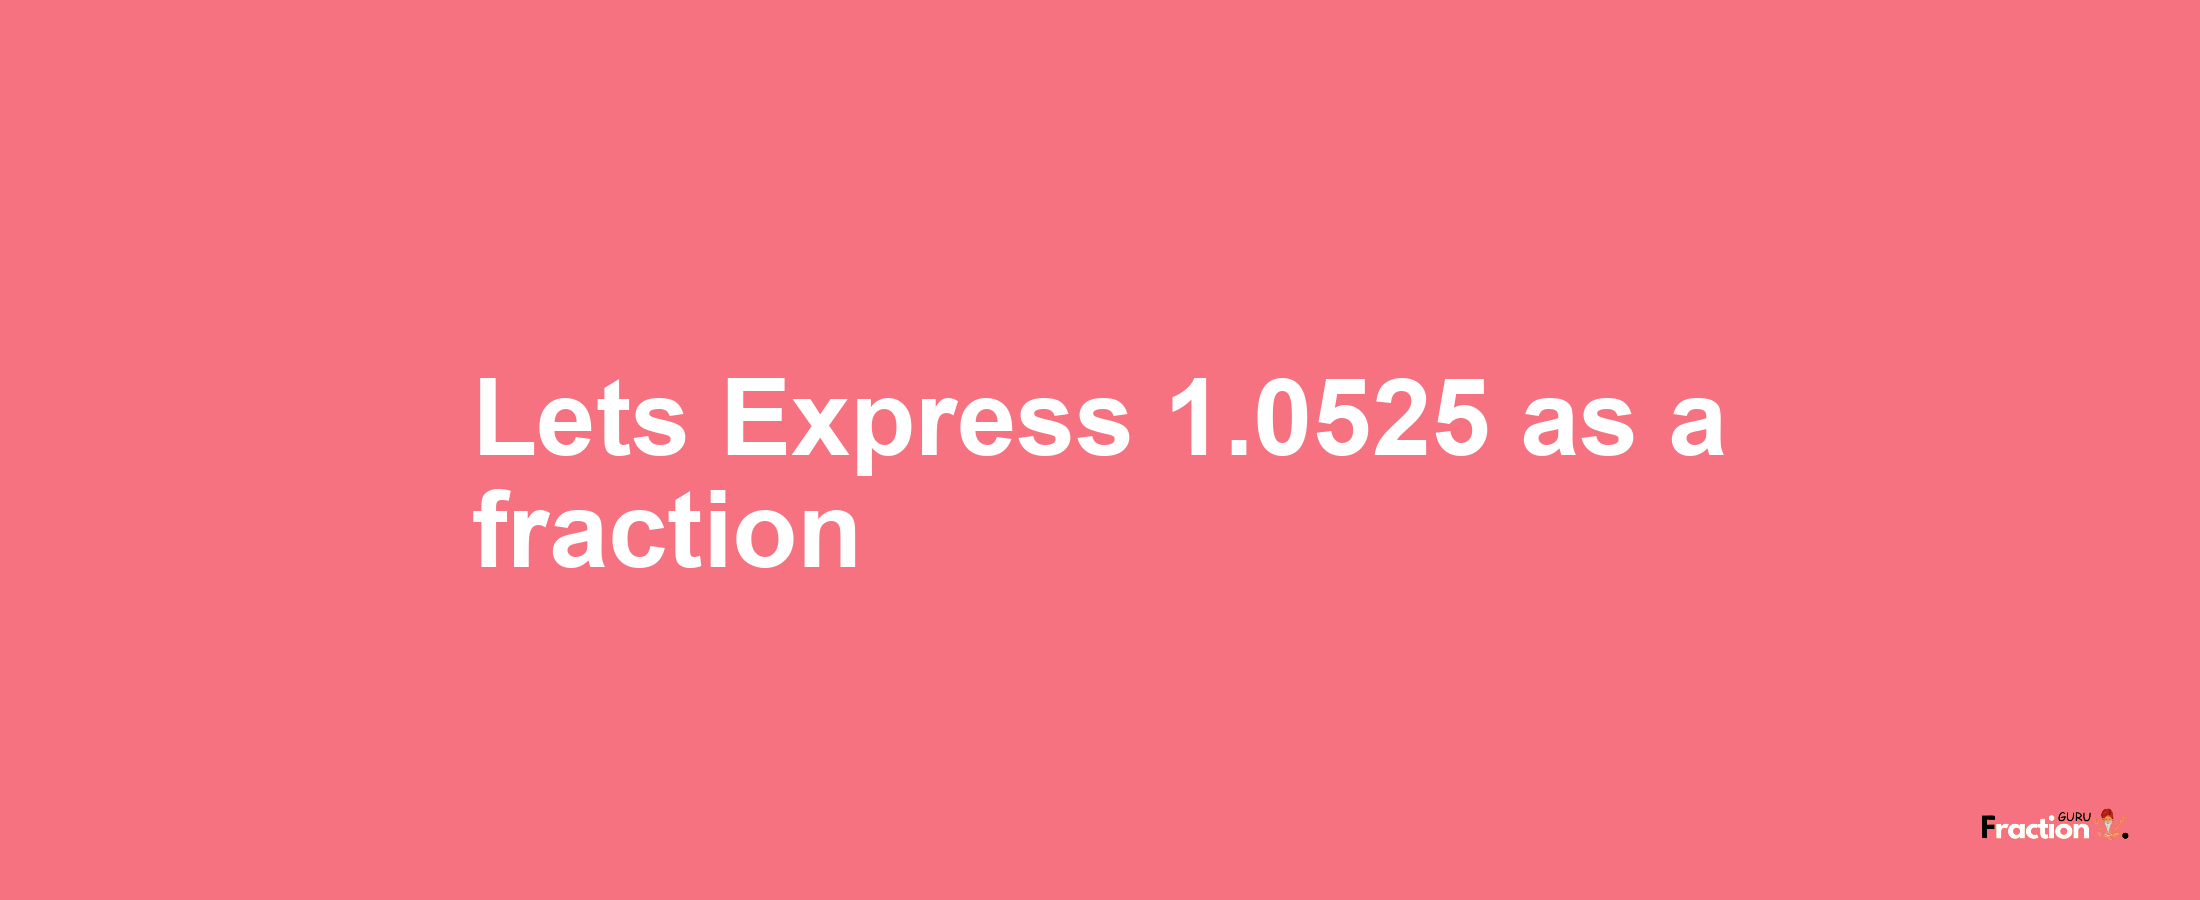 Lets Express 1.0525 as afraction